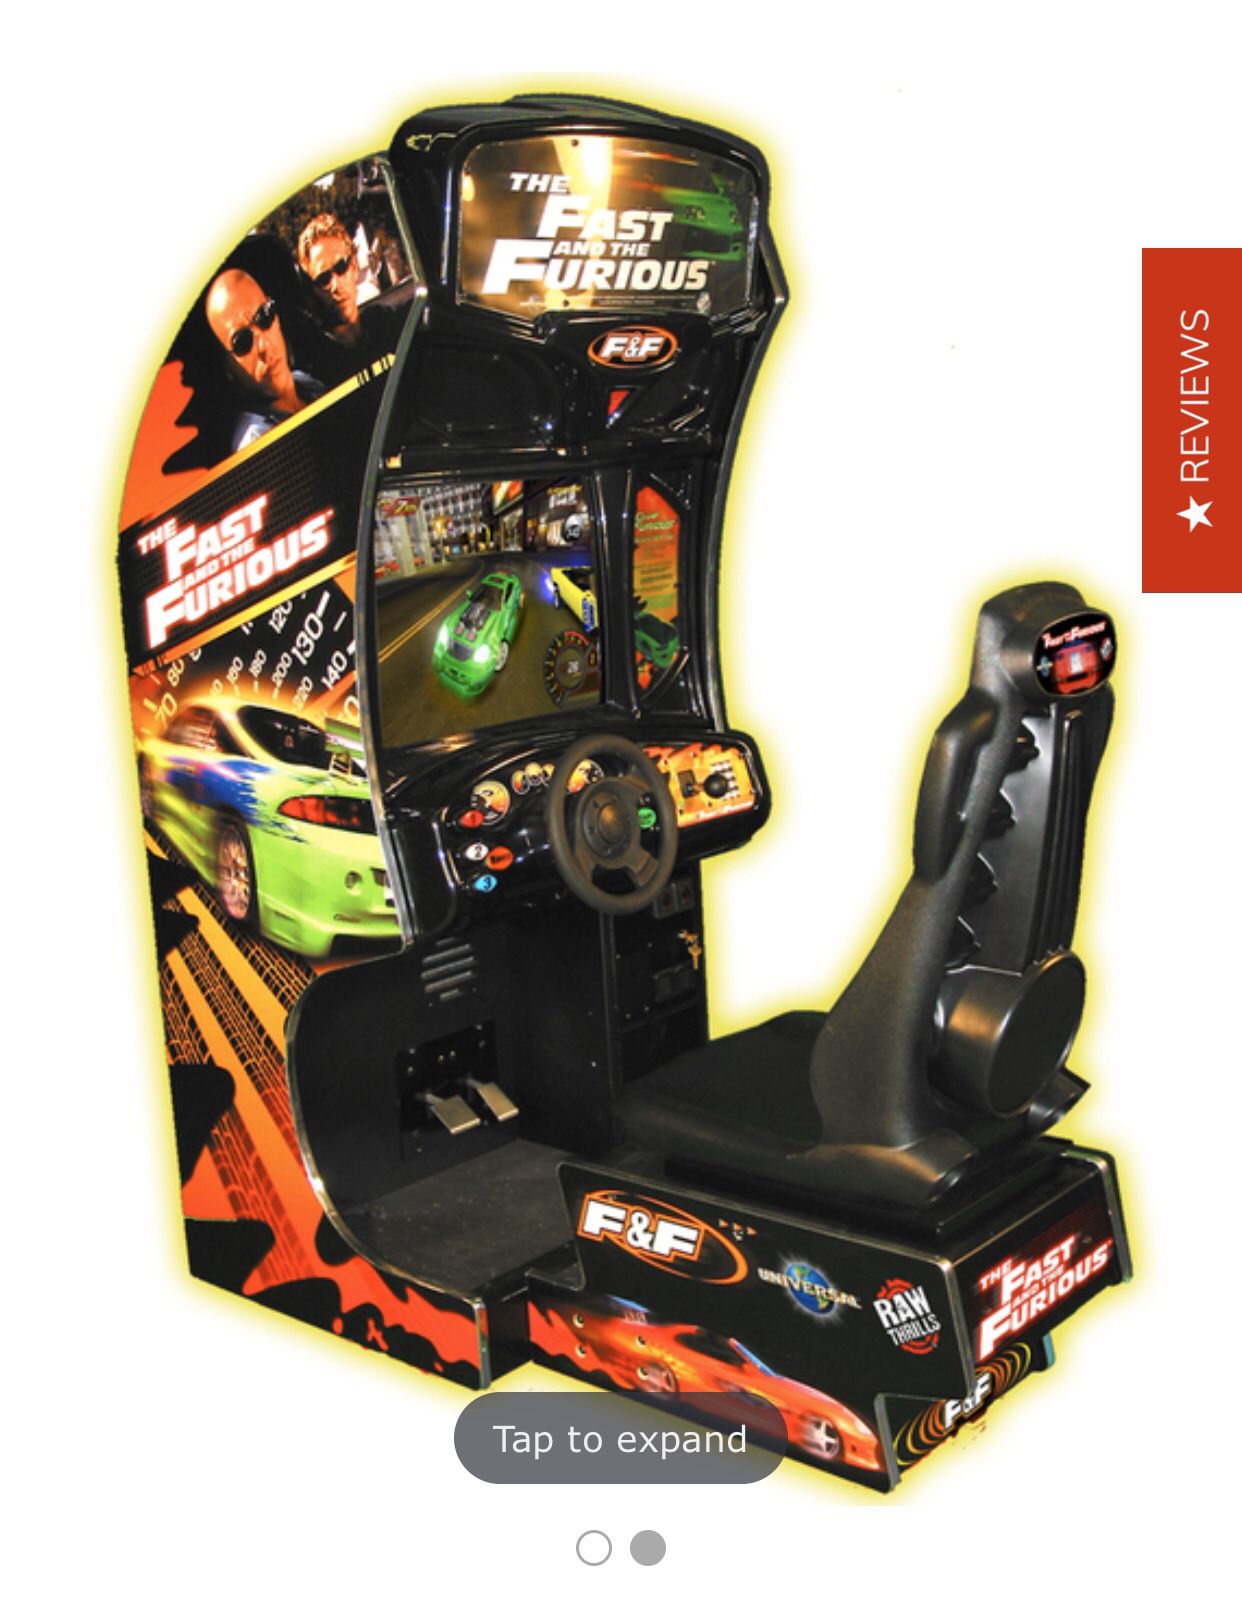 Fast and furious arcade game